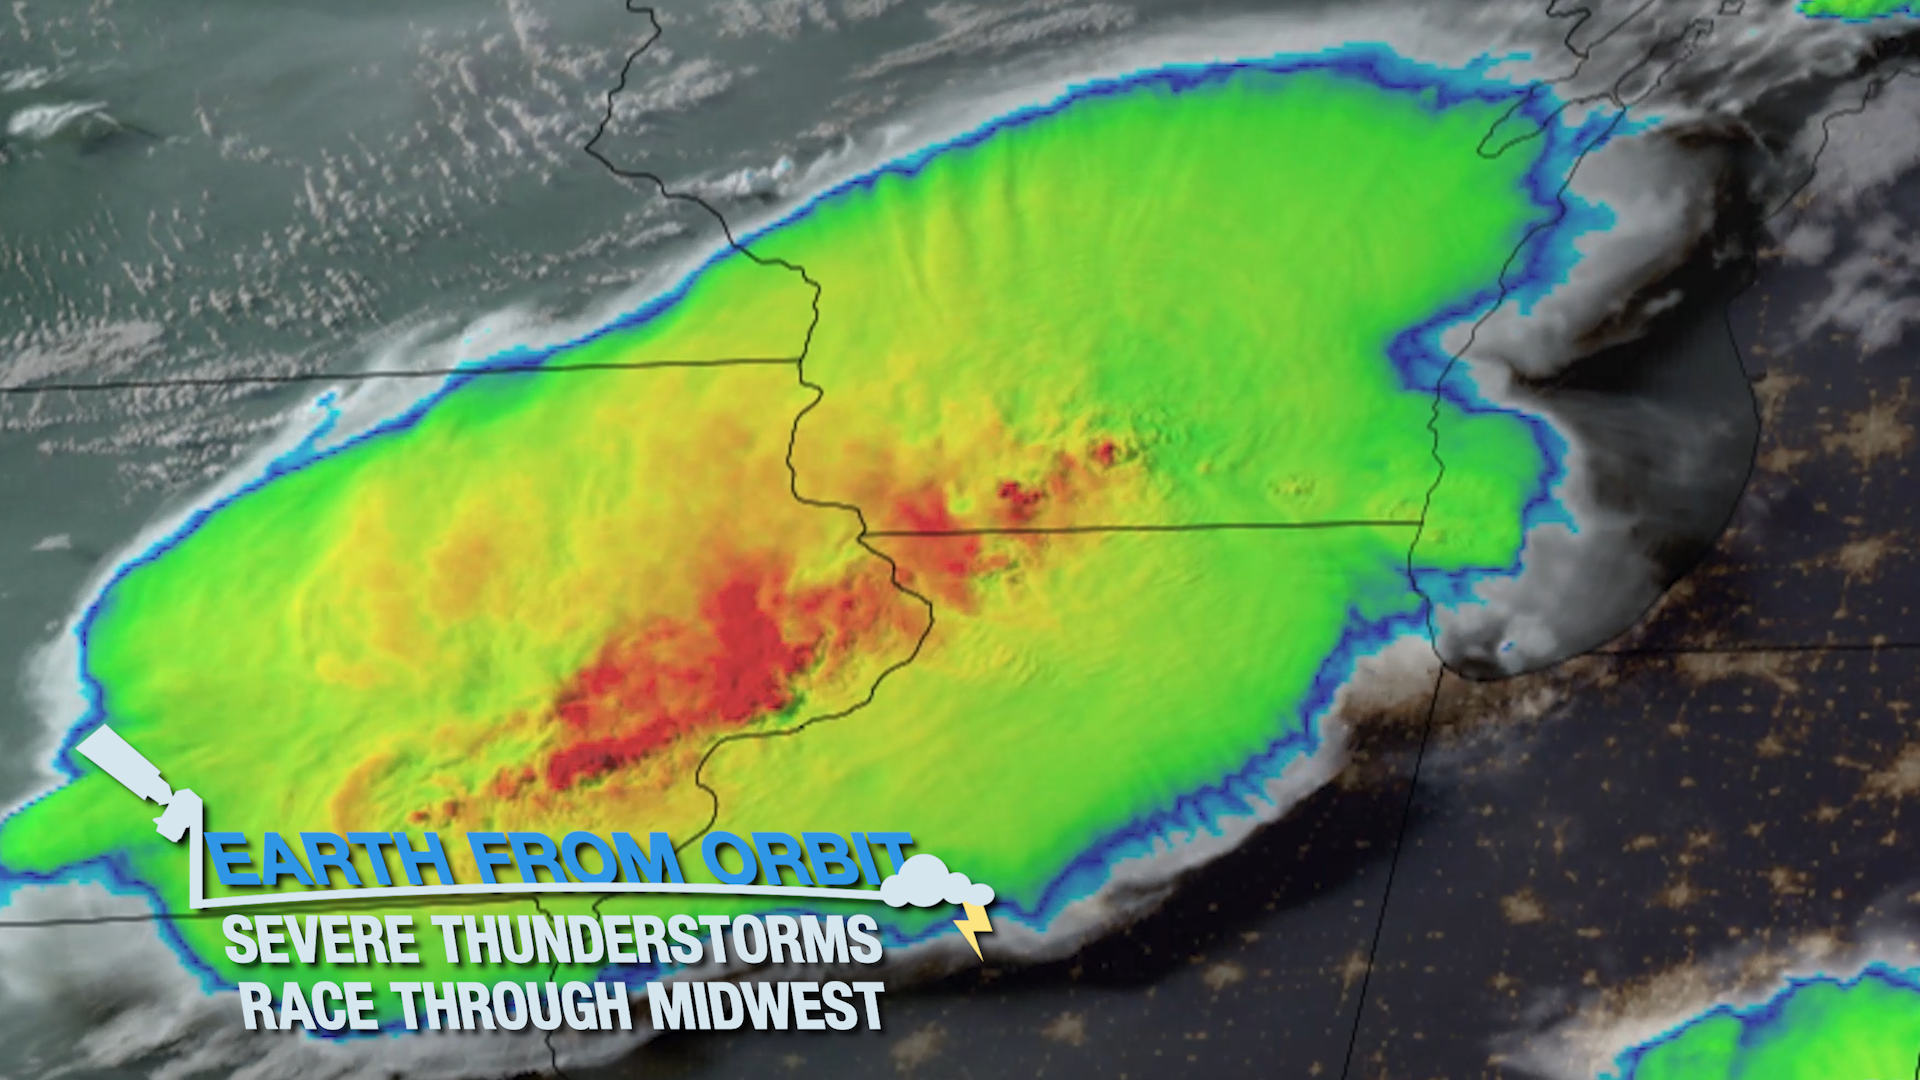 Severe Storms Race Through the Midwest